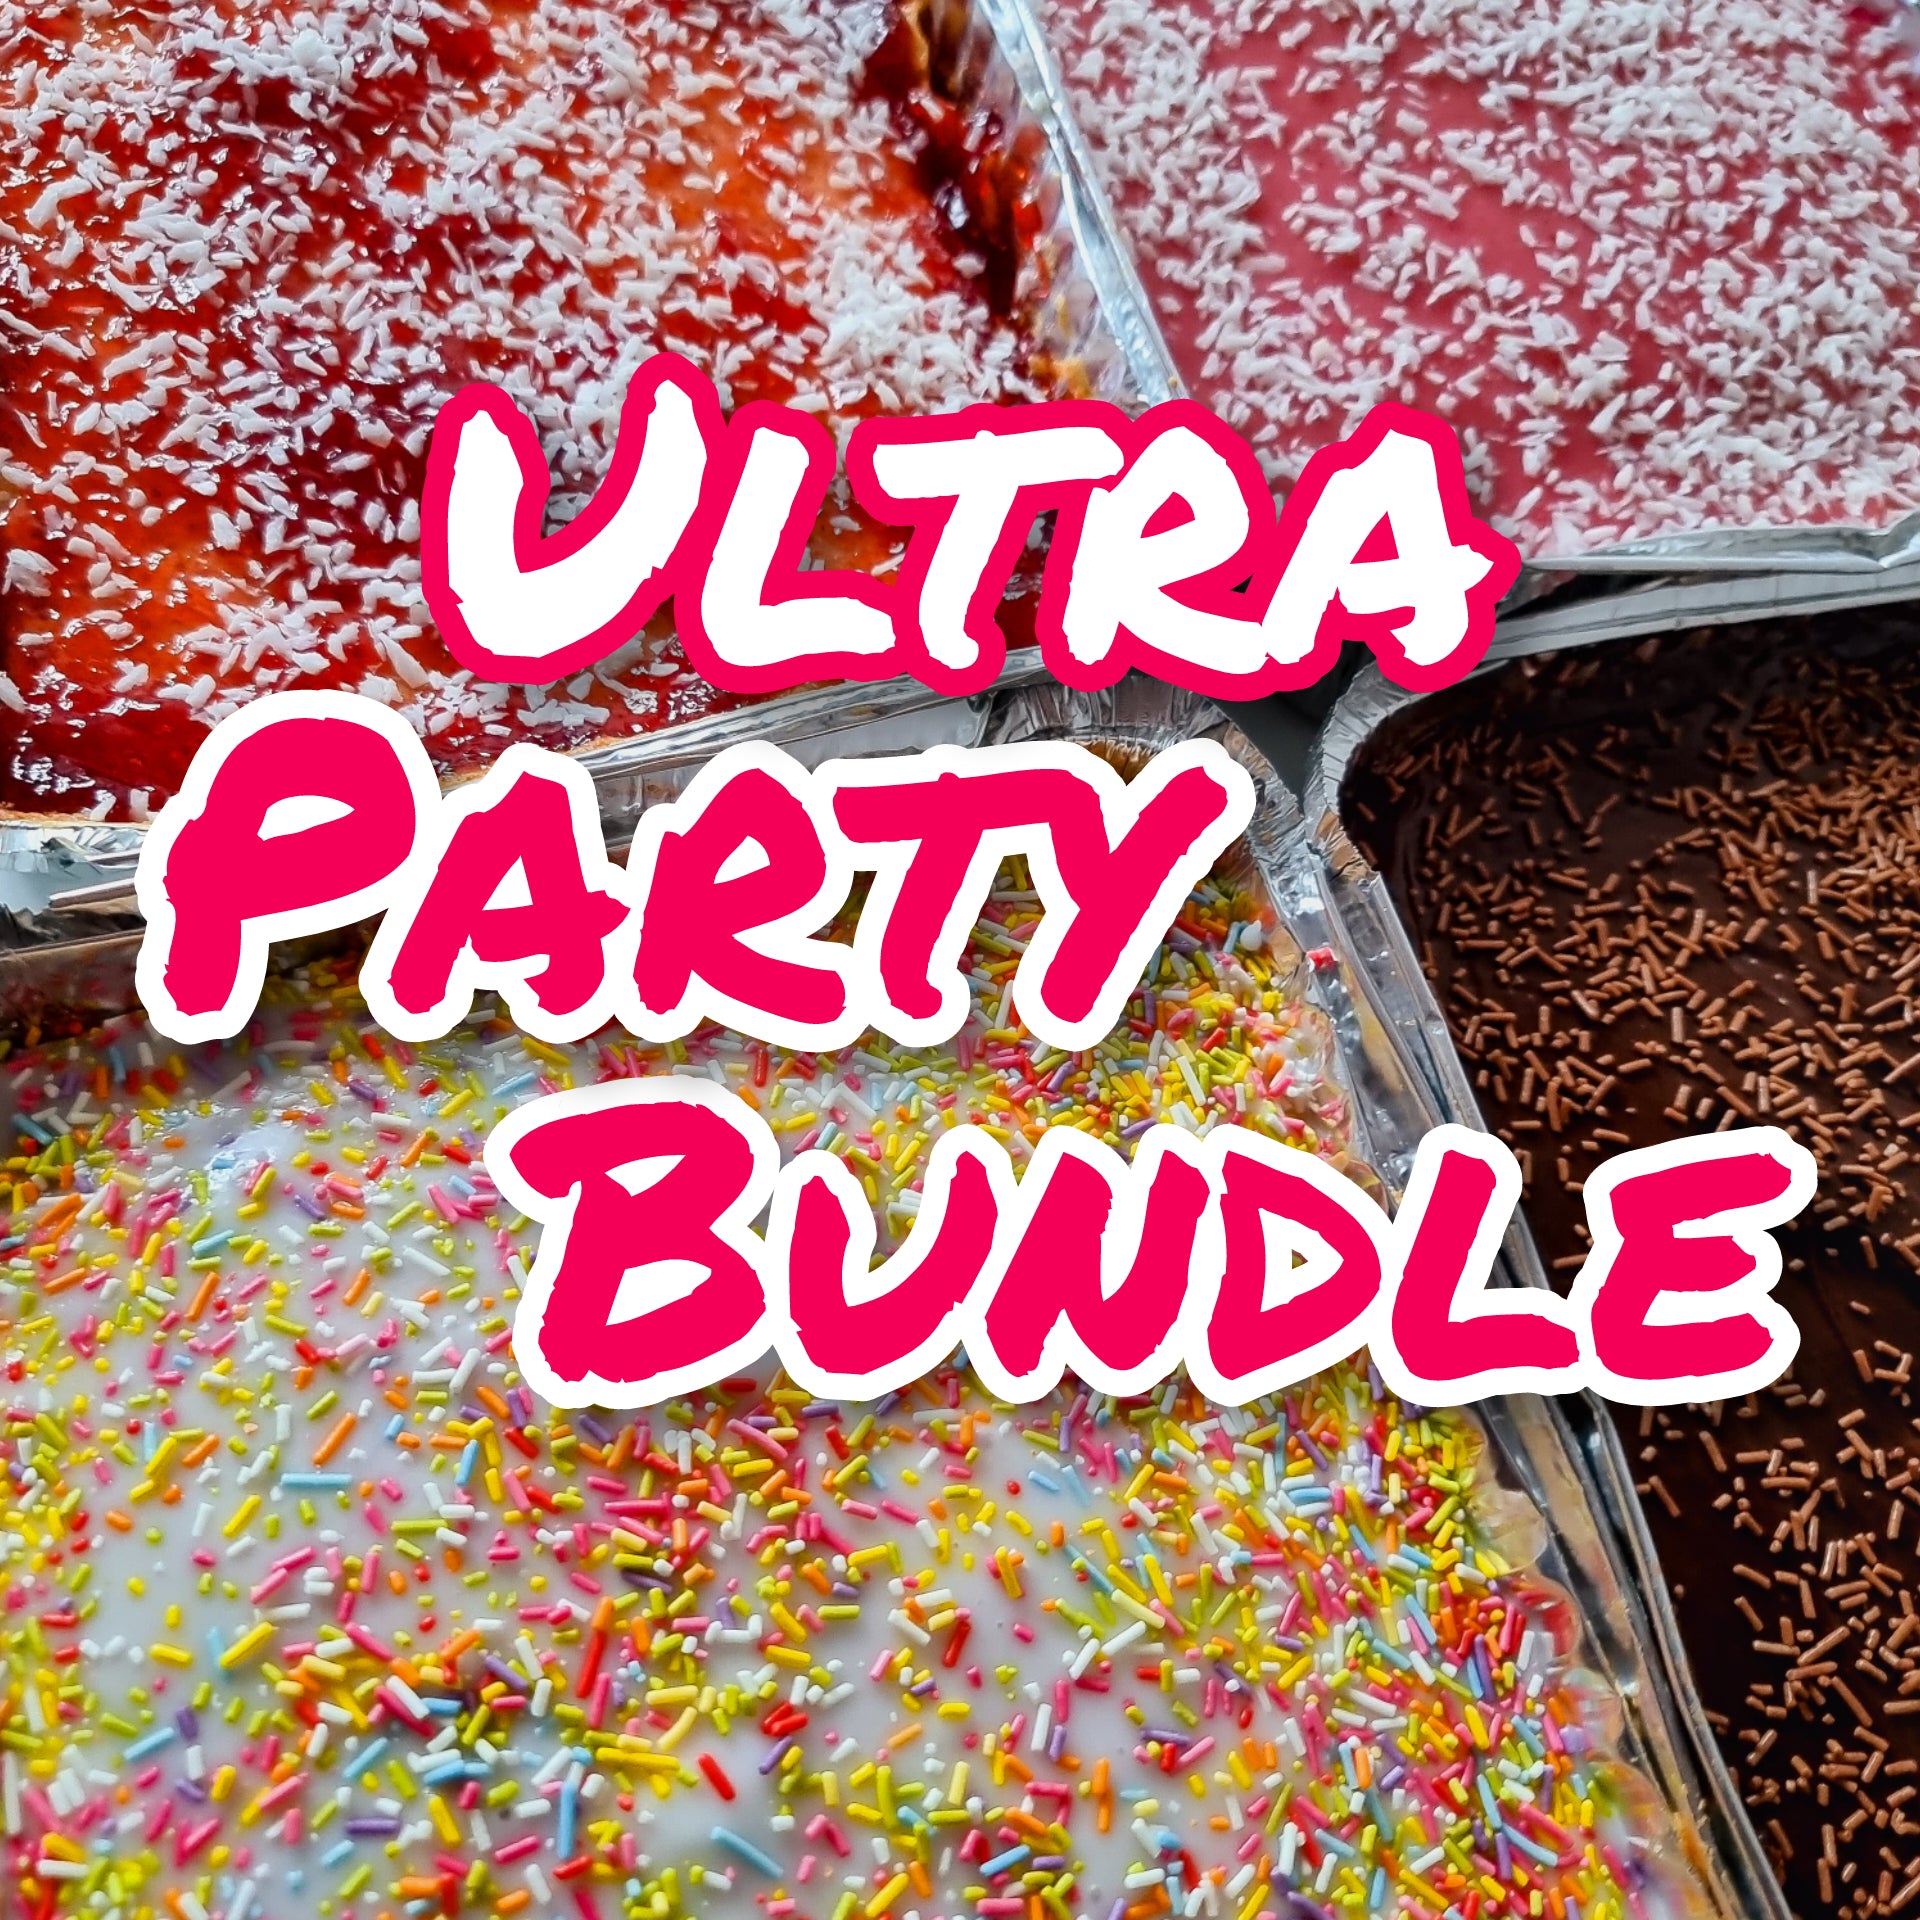 Ultra party cake trays bundle with 60 slices for an epic celebration